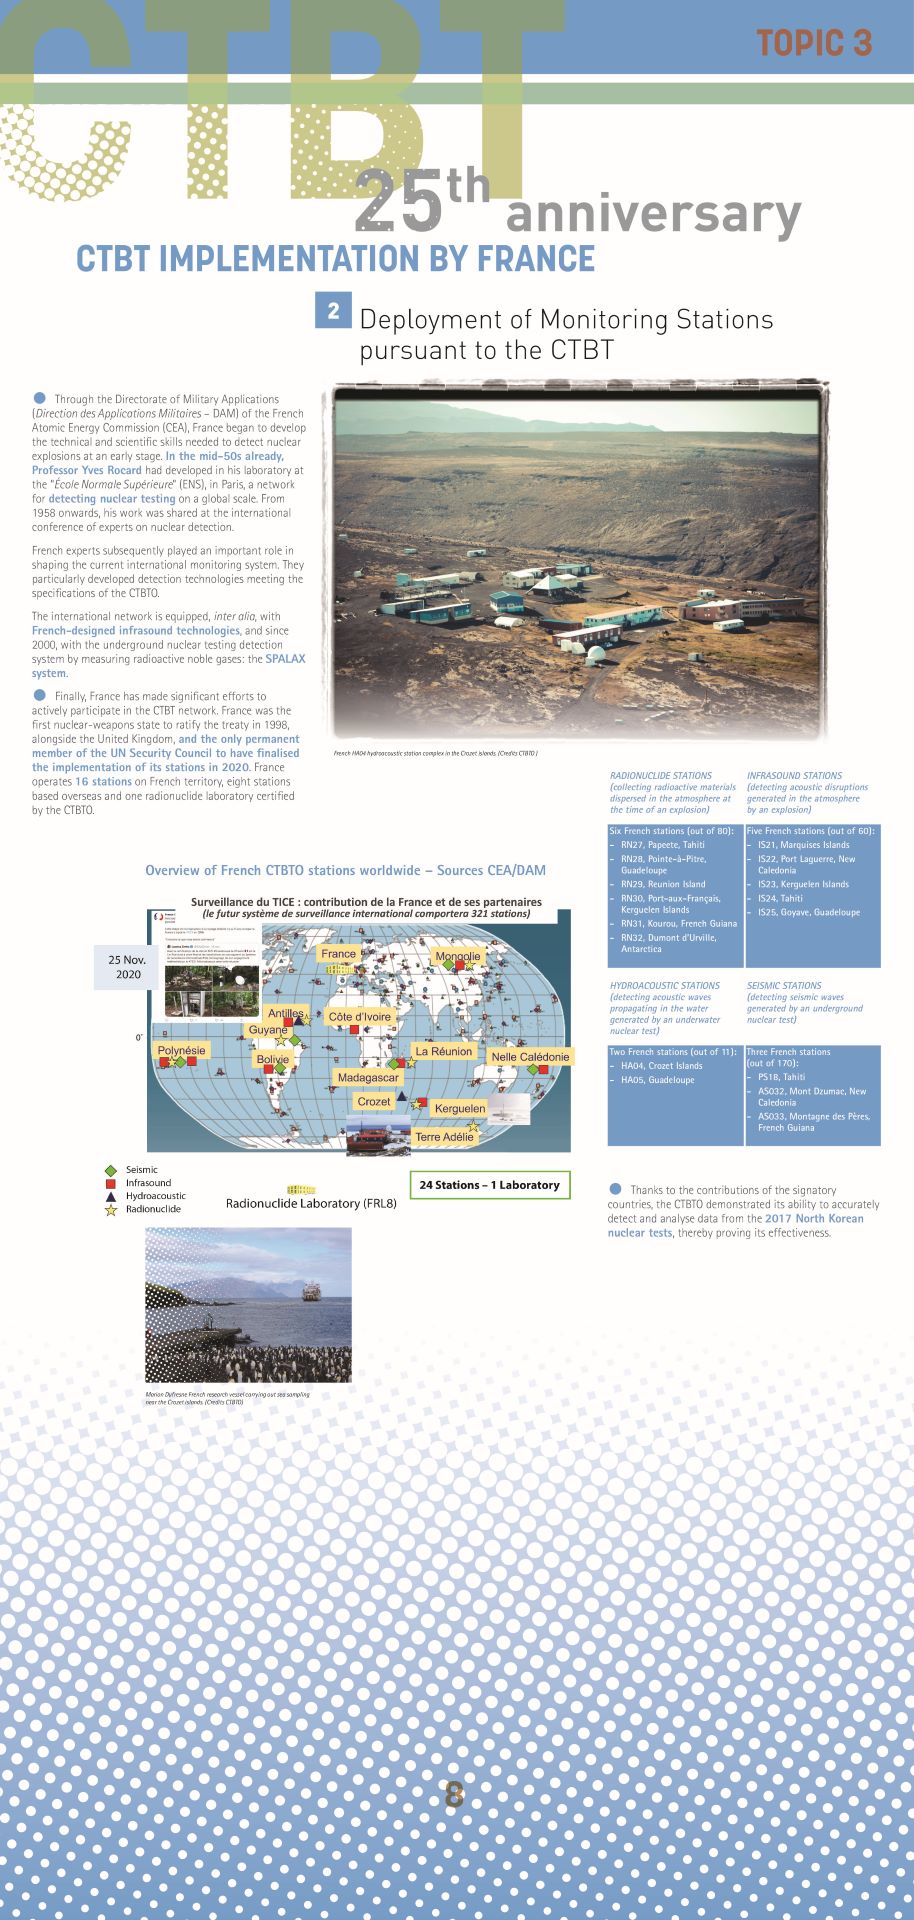 CTBT 25th anniversary - Deployment of monitoring stations pursuant to the CTBT